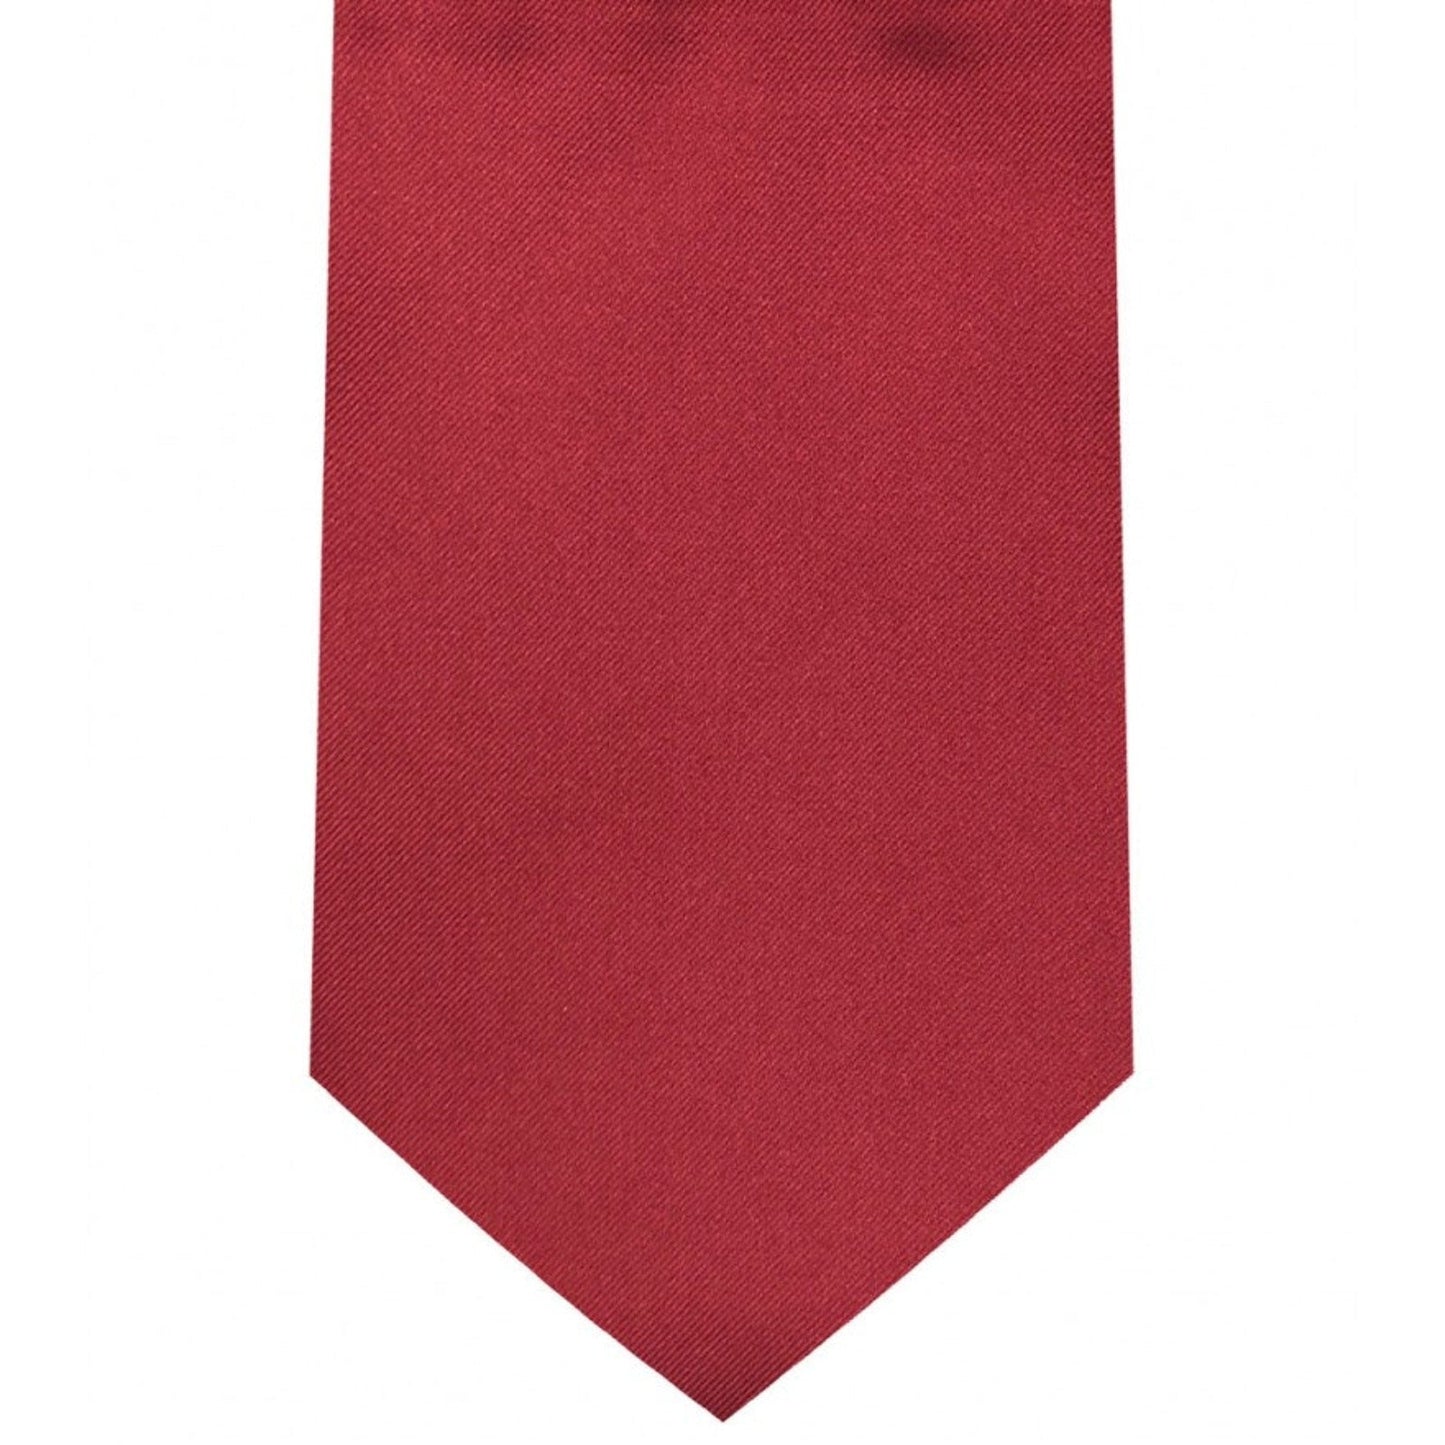 Classic Apple Red Tie Regular width 3.5 inches With Matching Pocket Square | KCT Menswear 